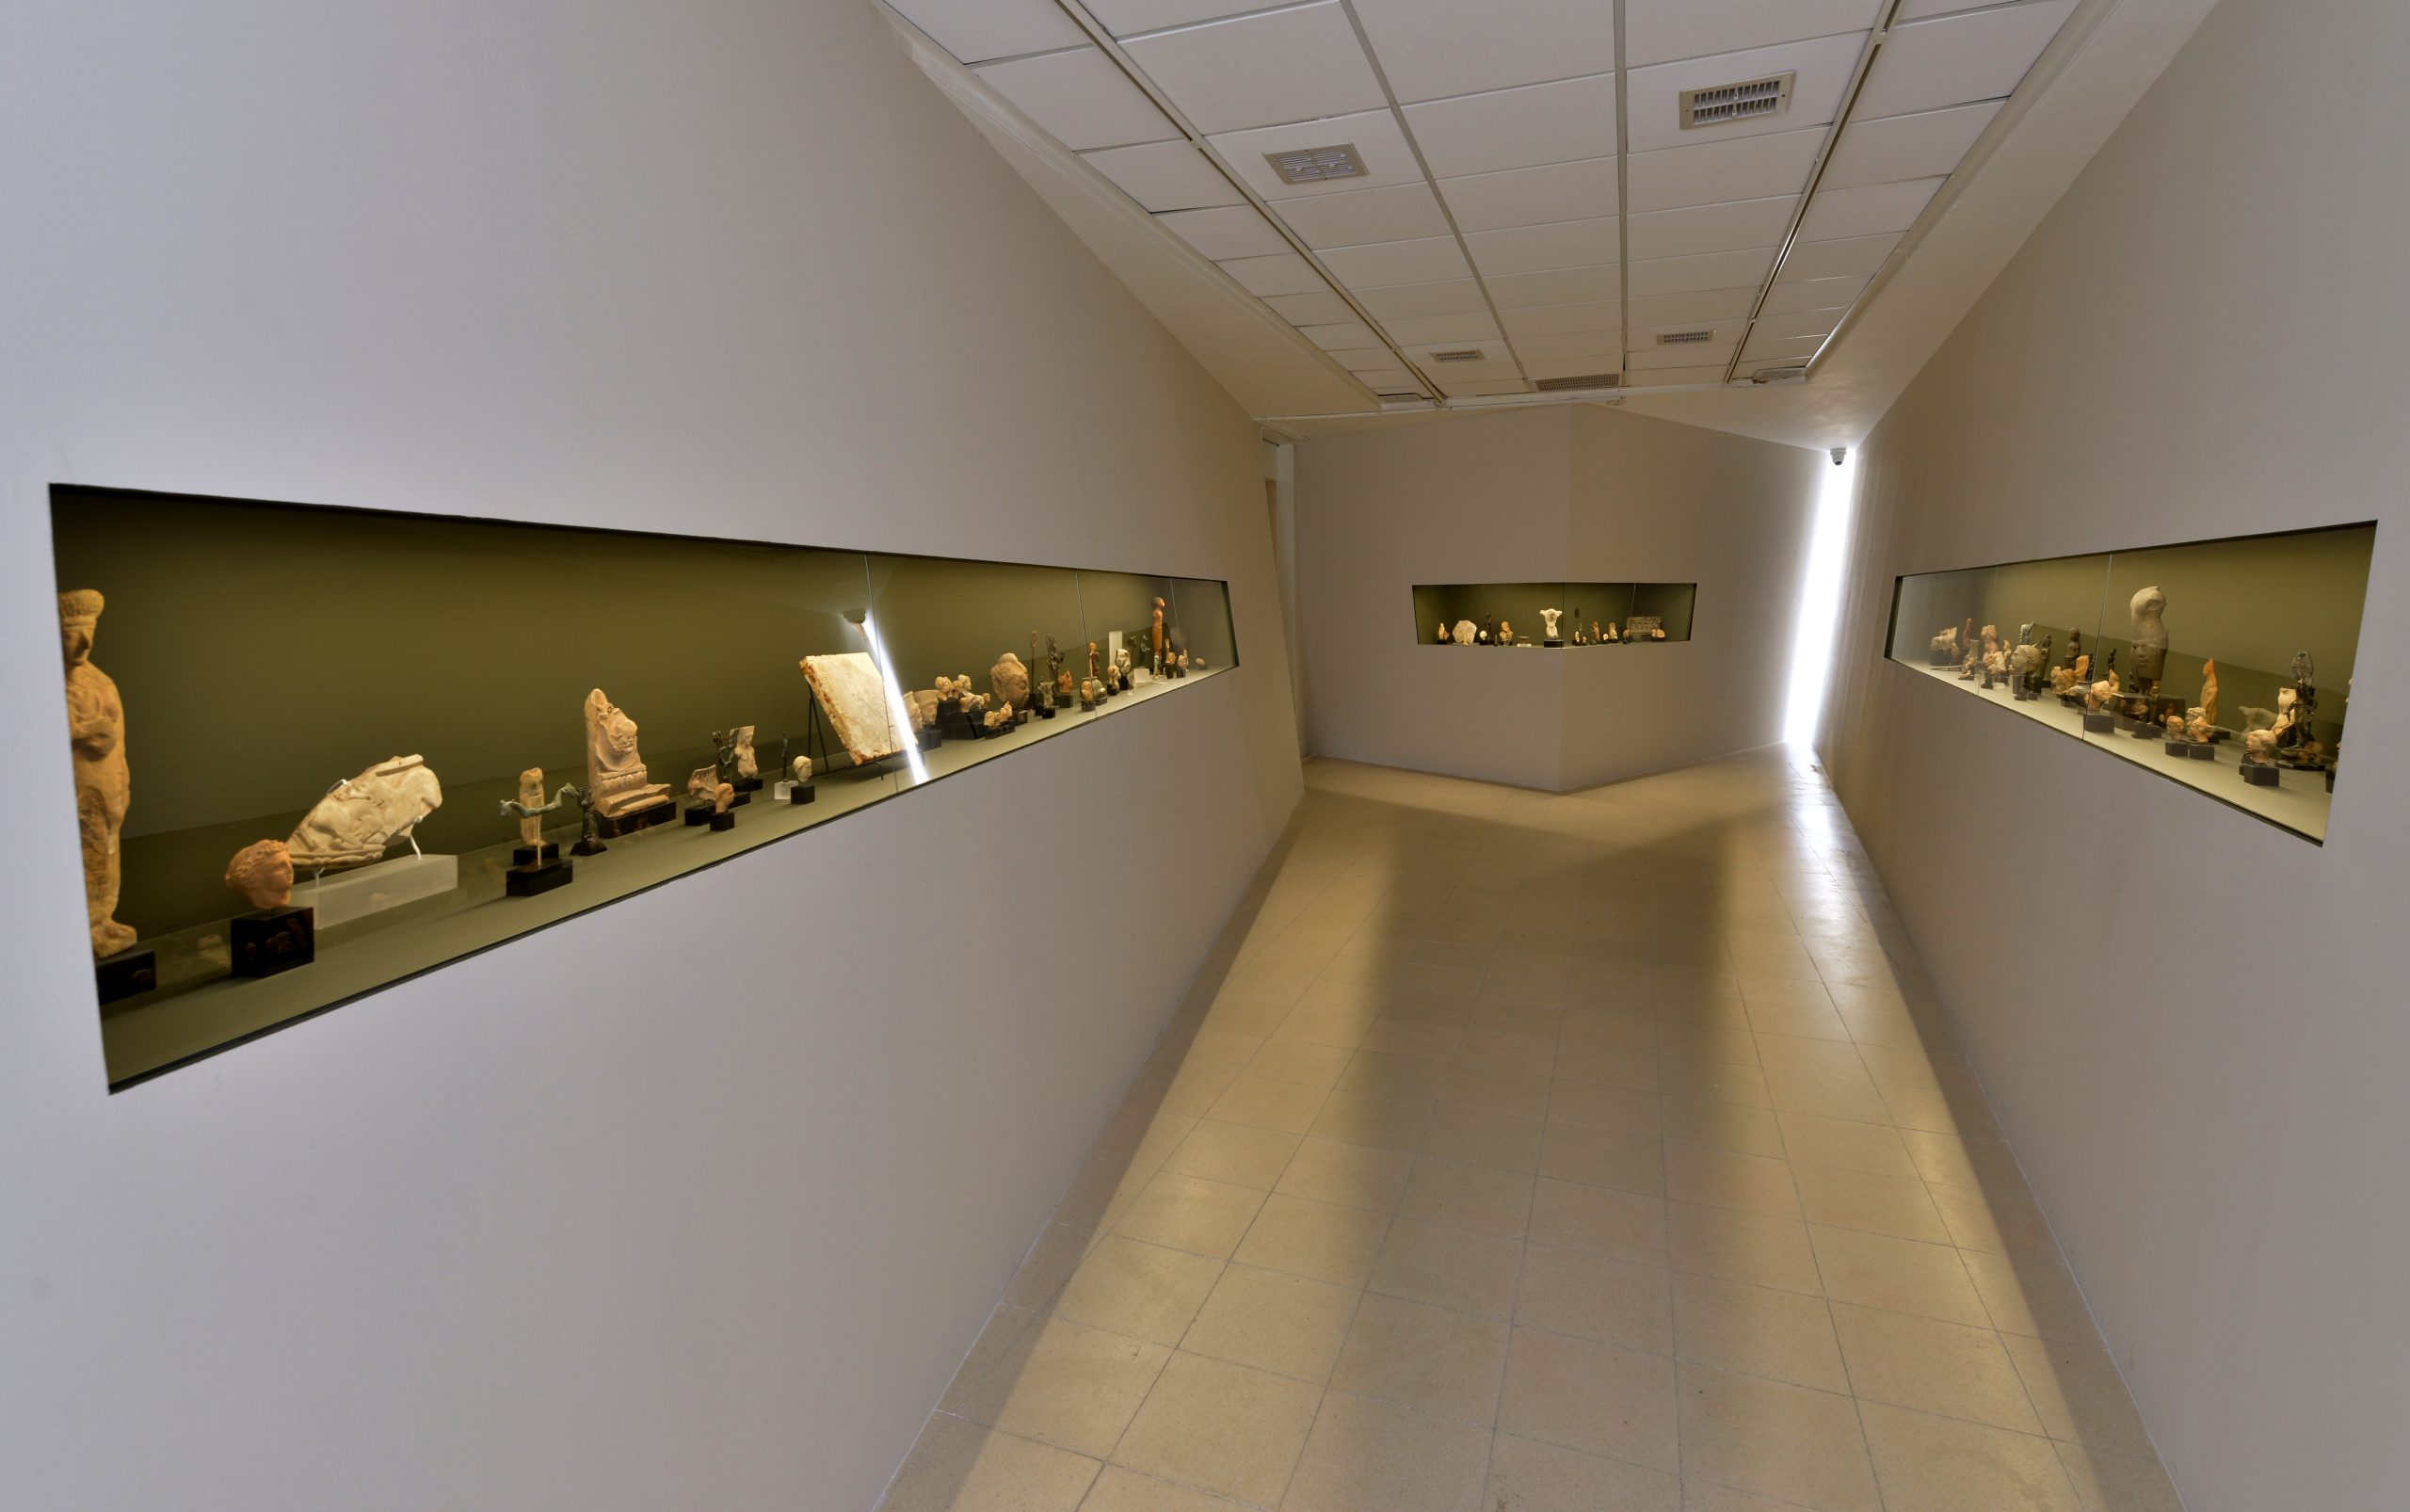 "The Collection", 2021, an installation built as a unique architectural space consisting of four diagonal plaster walls and three glass display cabinets in which the original collection of Wilfred Israel is displayed as one group with no hierarchies or additional labels,
dimentions 17m x 5m x 3m